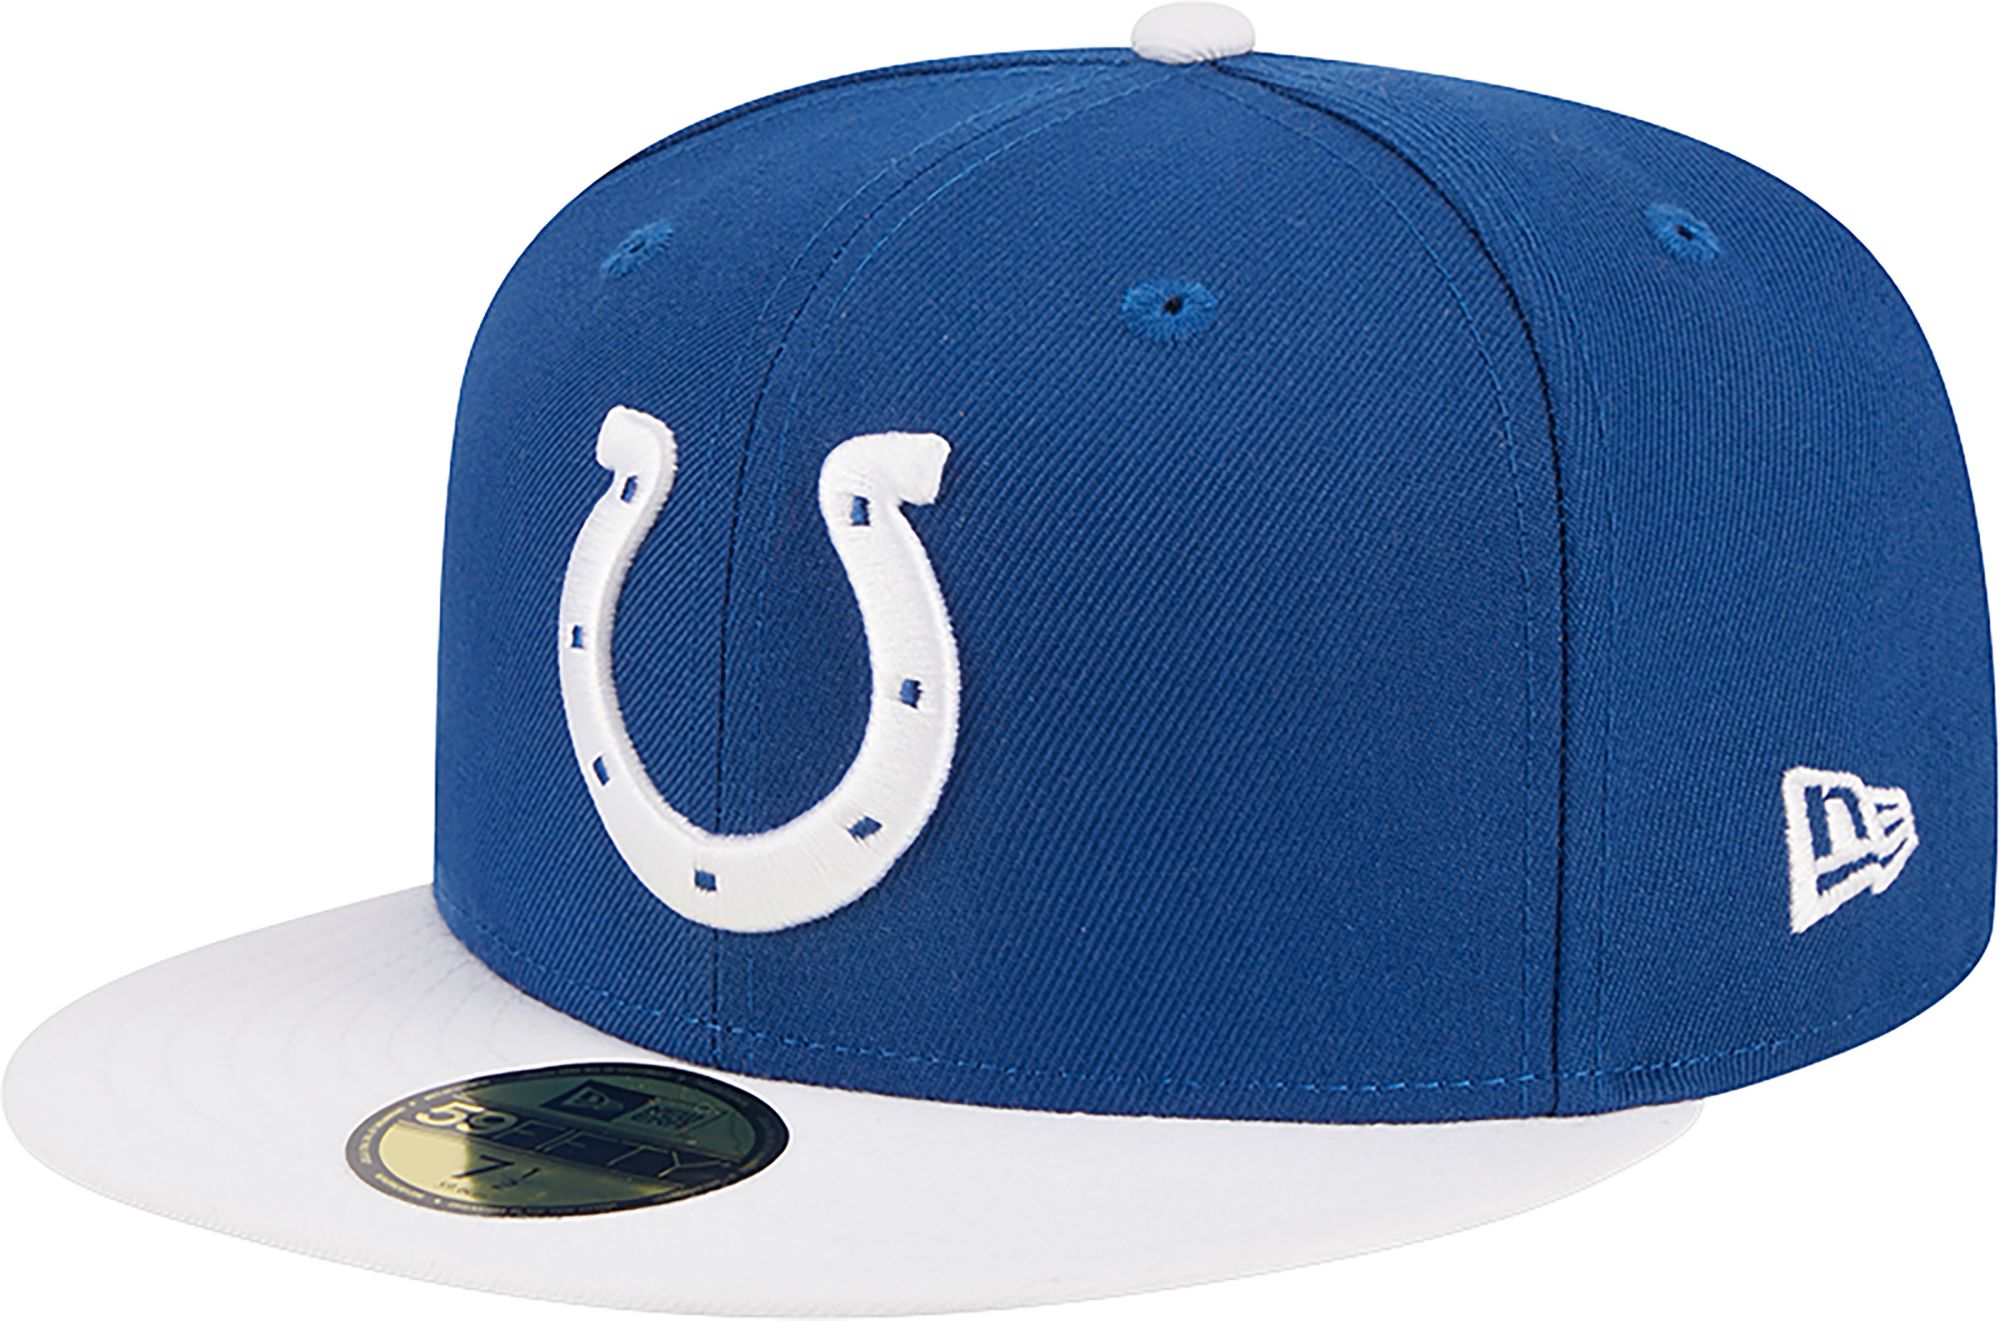 NEW ERA MEN'S INDIANAPOLIS COLTS HIDDEN TEAM COLOR 59FITY FITTED HAT INTERNATIONAL SHIPPING